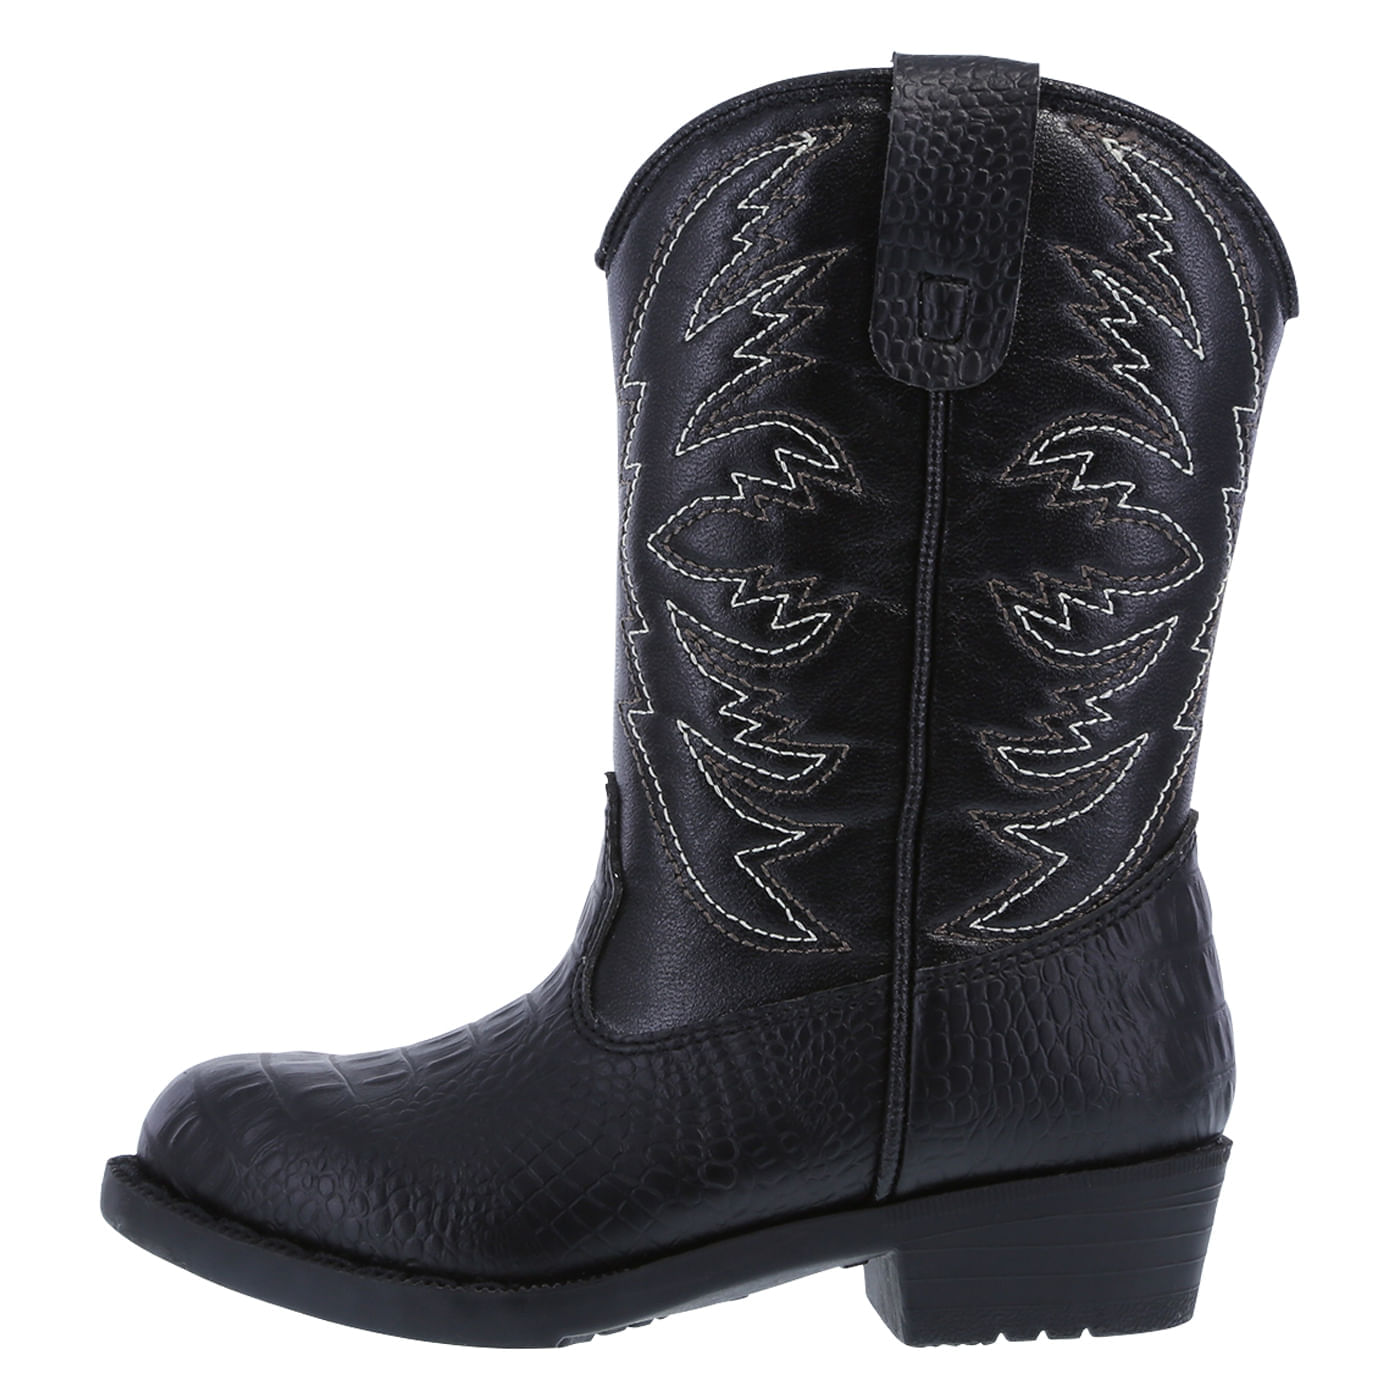 wide width boots payless